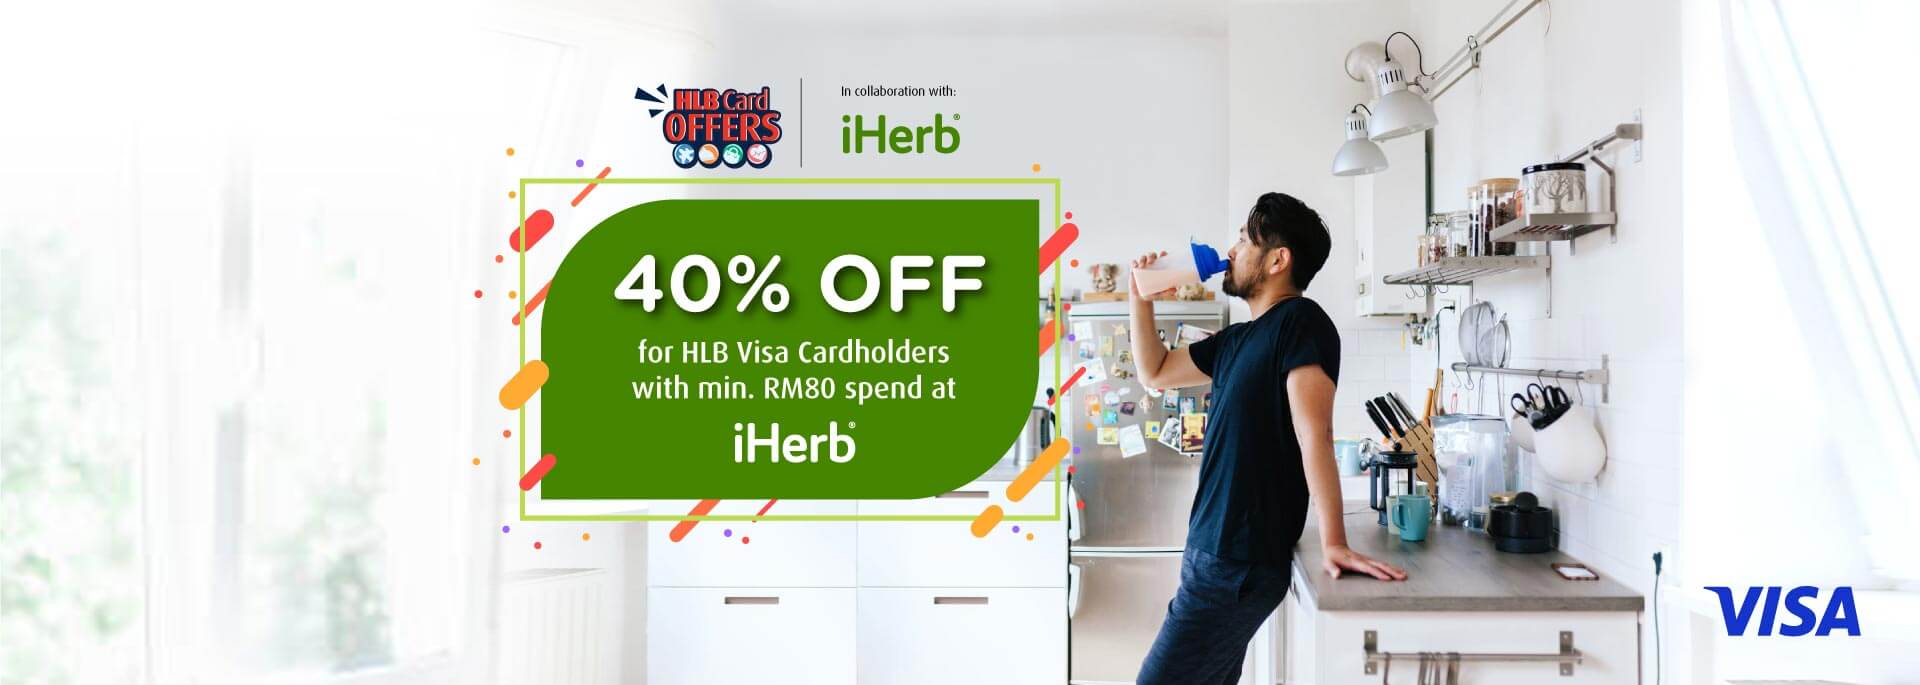 Here’s a fit tip for you: Shop at iHerb with your HLB Visa Card to enjoy extra savings! 